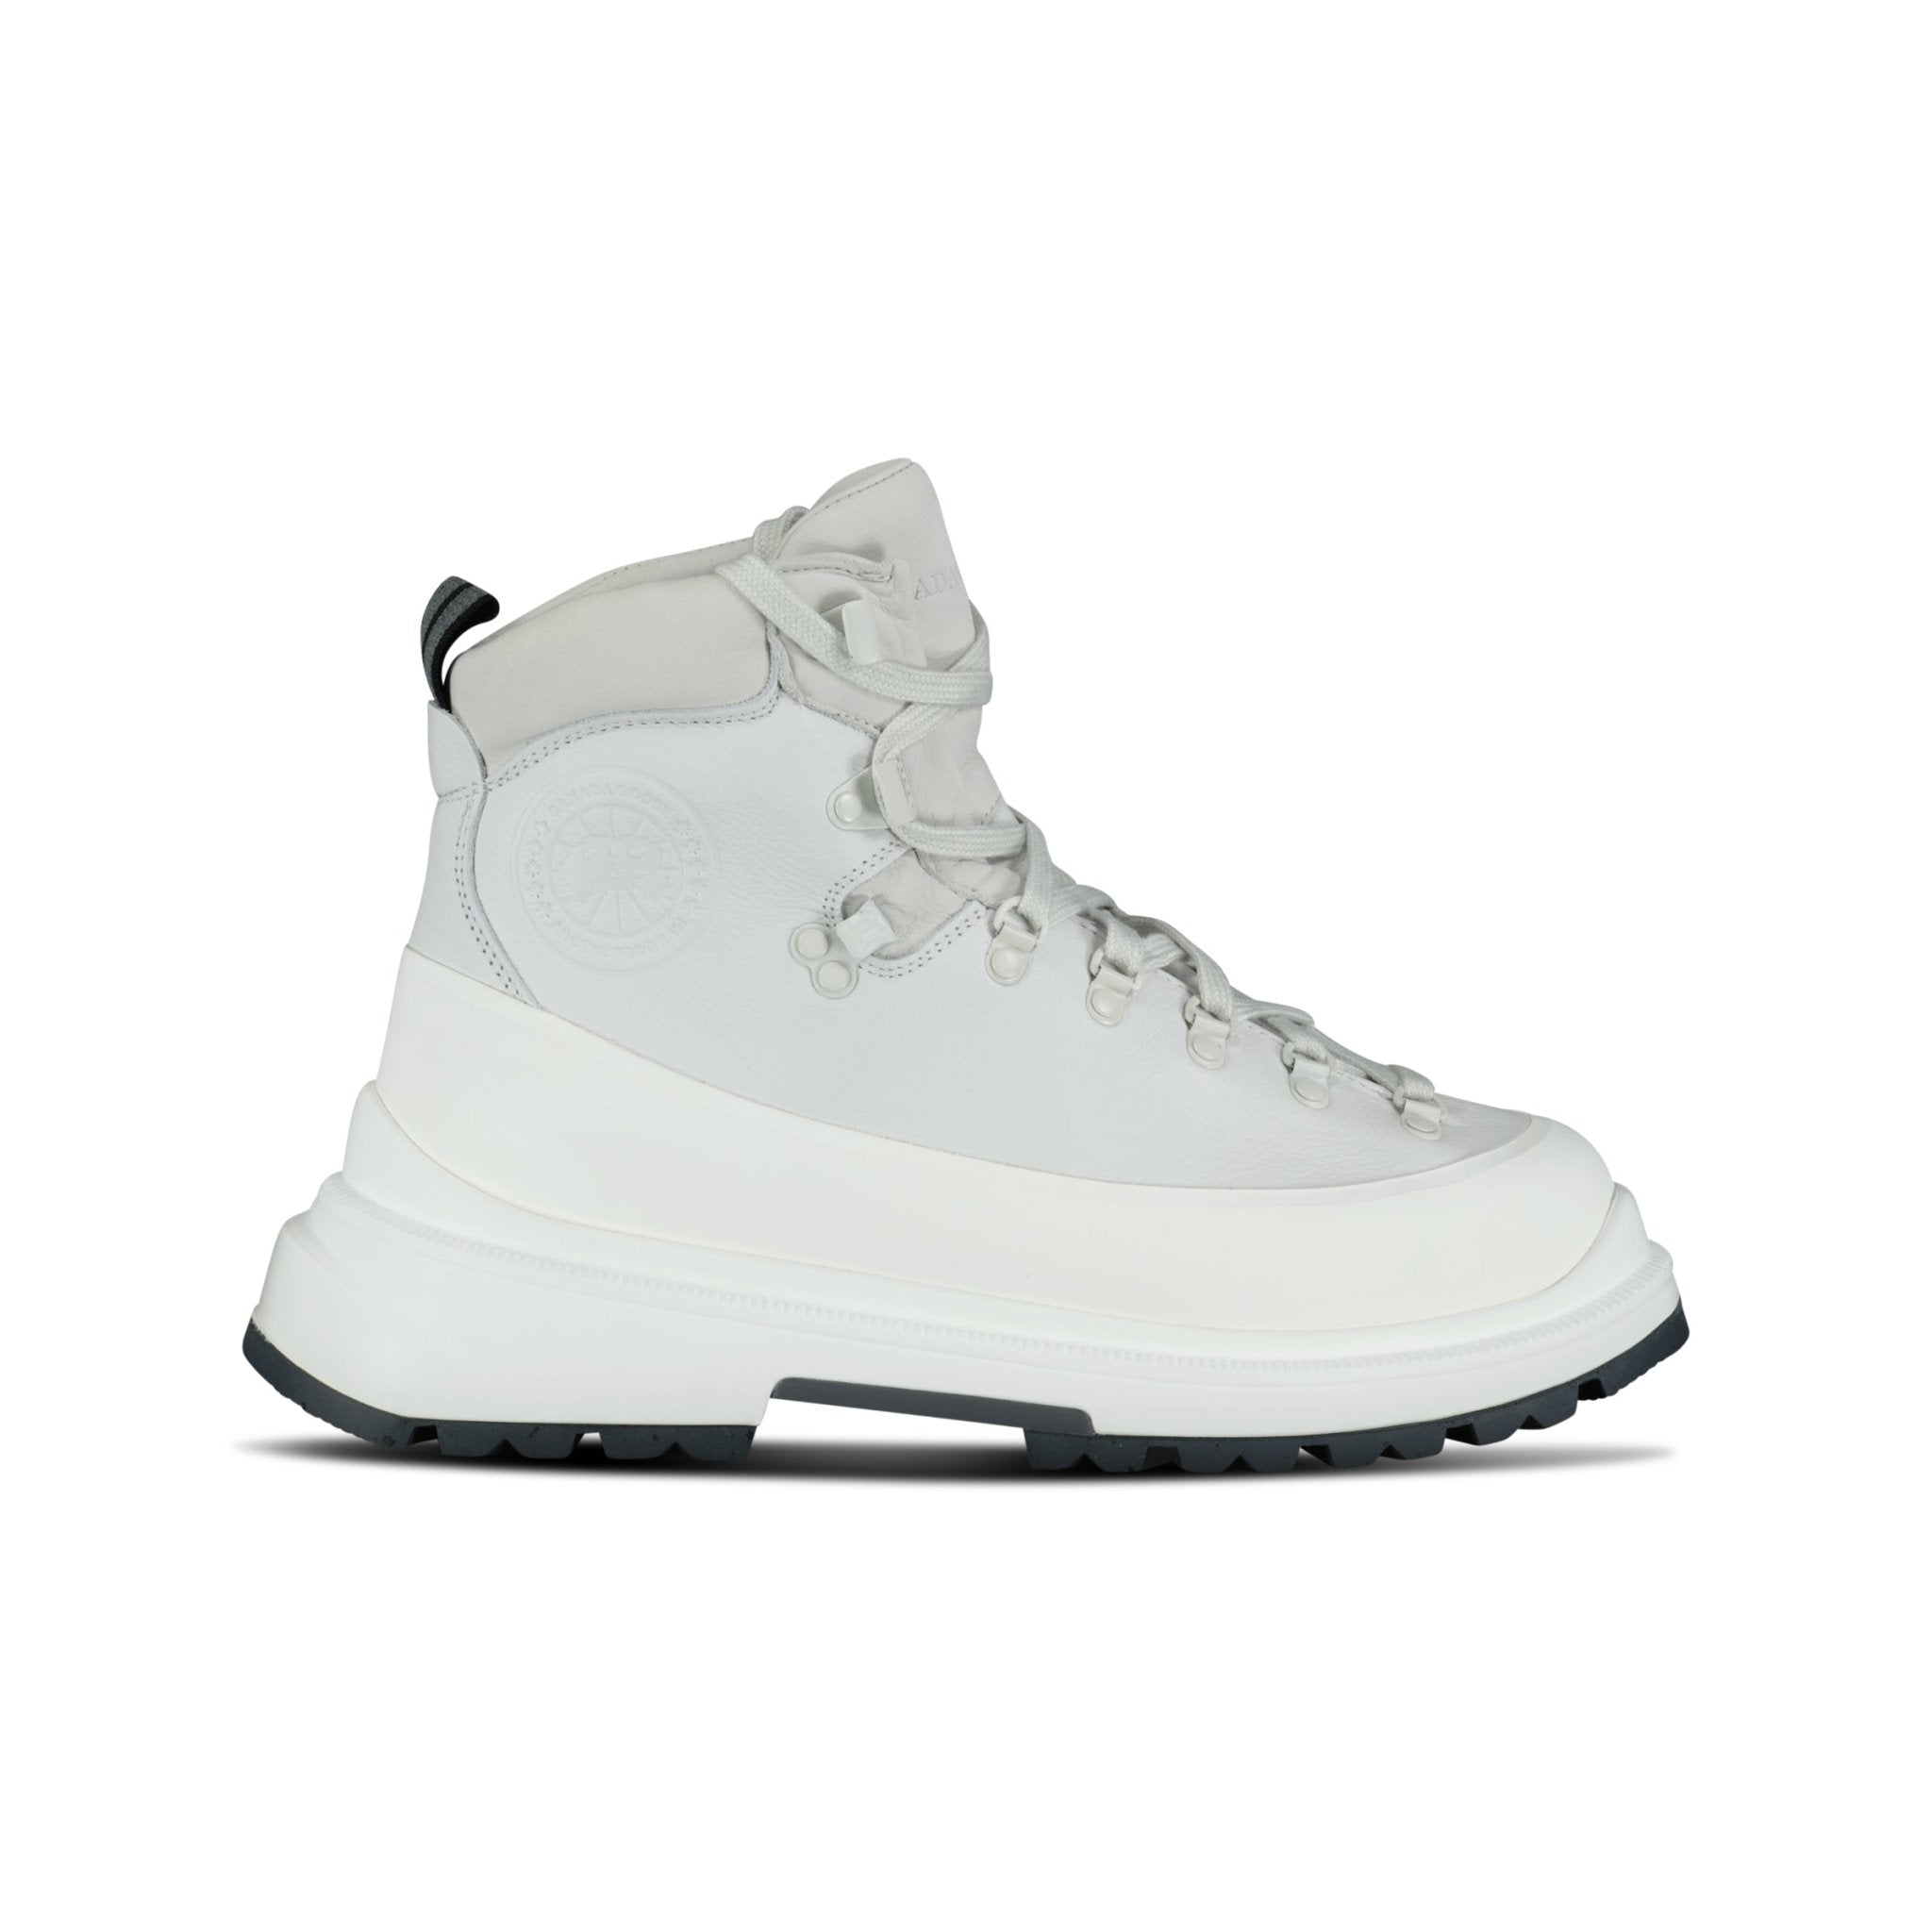 Canada Goose 'Journey' Boots White